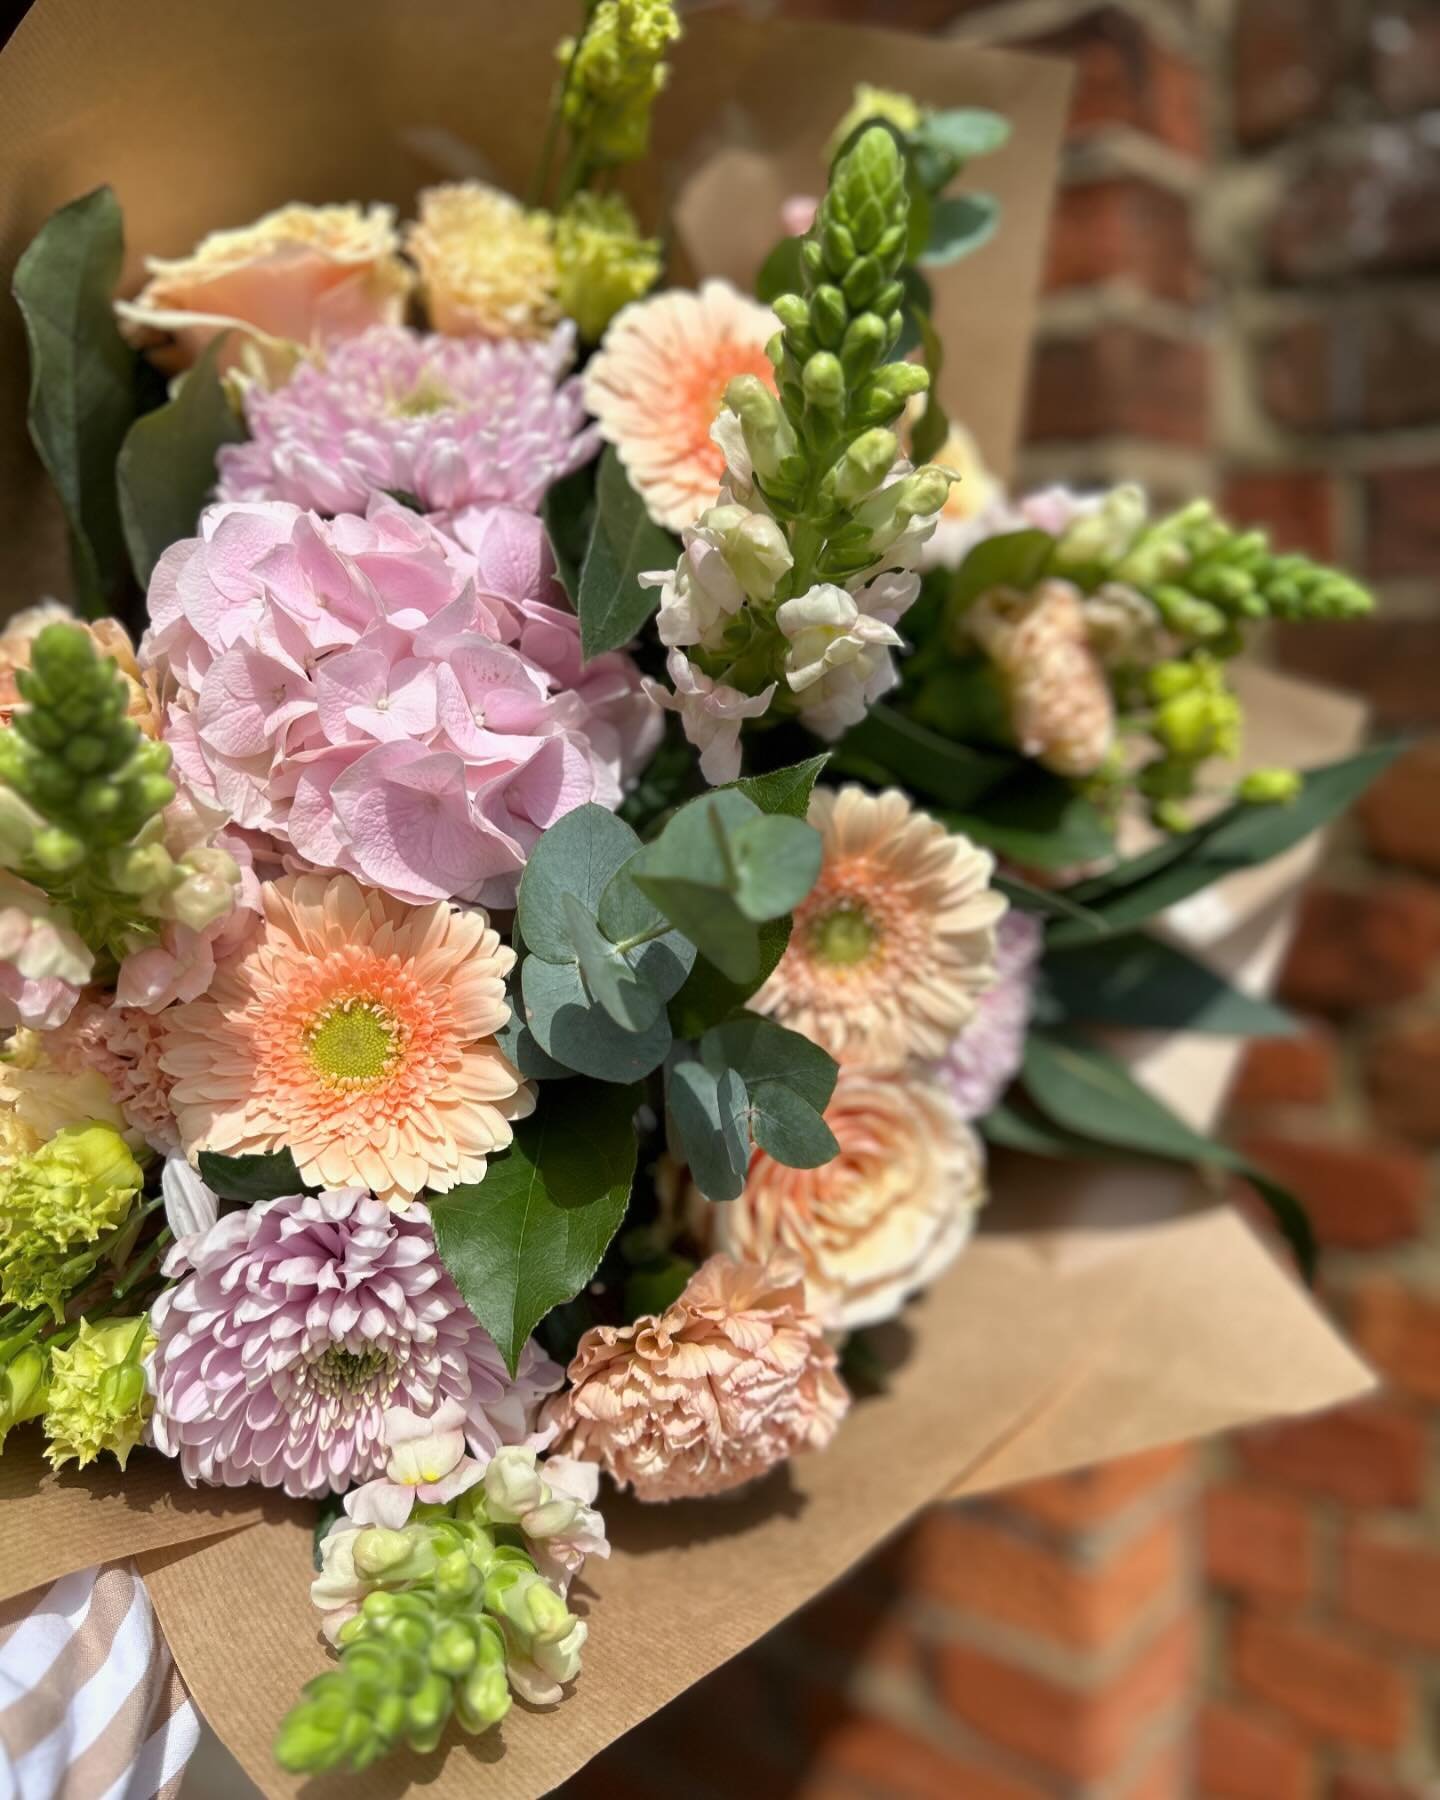 🌼GIVEAWAY🌼

To celebrate our 2nd birthday of taking over The Blue Dandelion, we are giving someone the chance to win a bouquet once a month for a year* 🌷

To enter all you have to do is 
🌸like this post
🌸tag 3 friends (all must be following to w